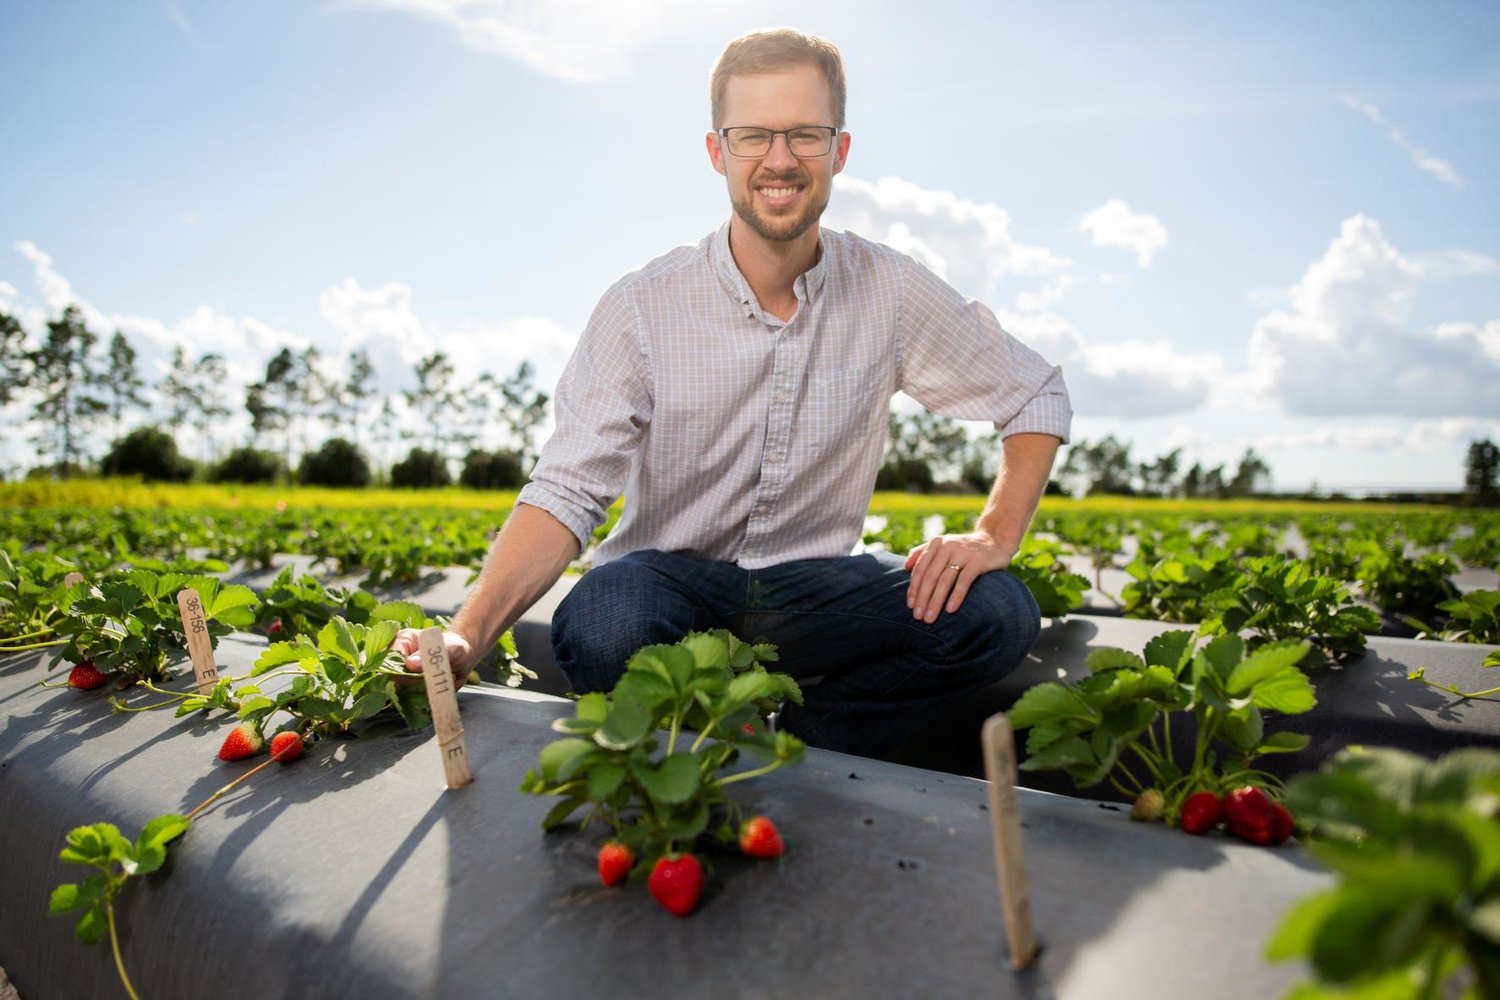 “We already have a lot of technology that helps us understand the genes in strawberries, but those genes still need to be connected to their actual effect on the plant – in this case how the plant resists powdery mildew disease,” said Vance Whitaker, an associate professor at UF/IFAS.